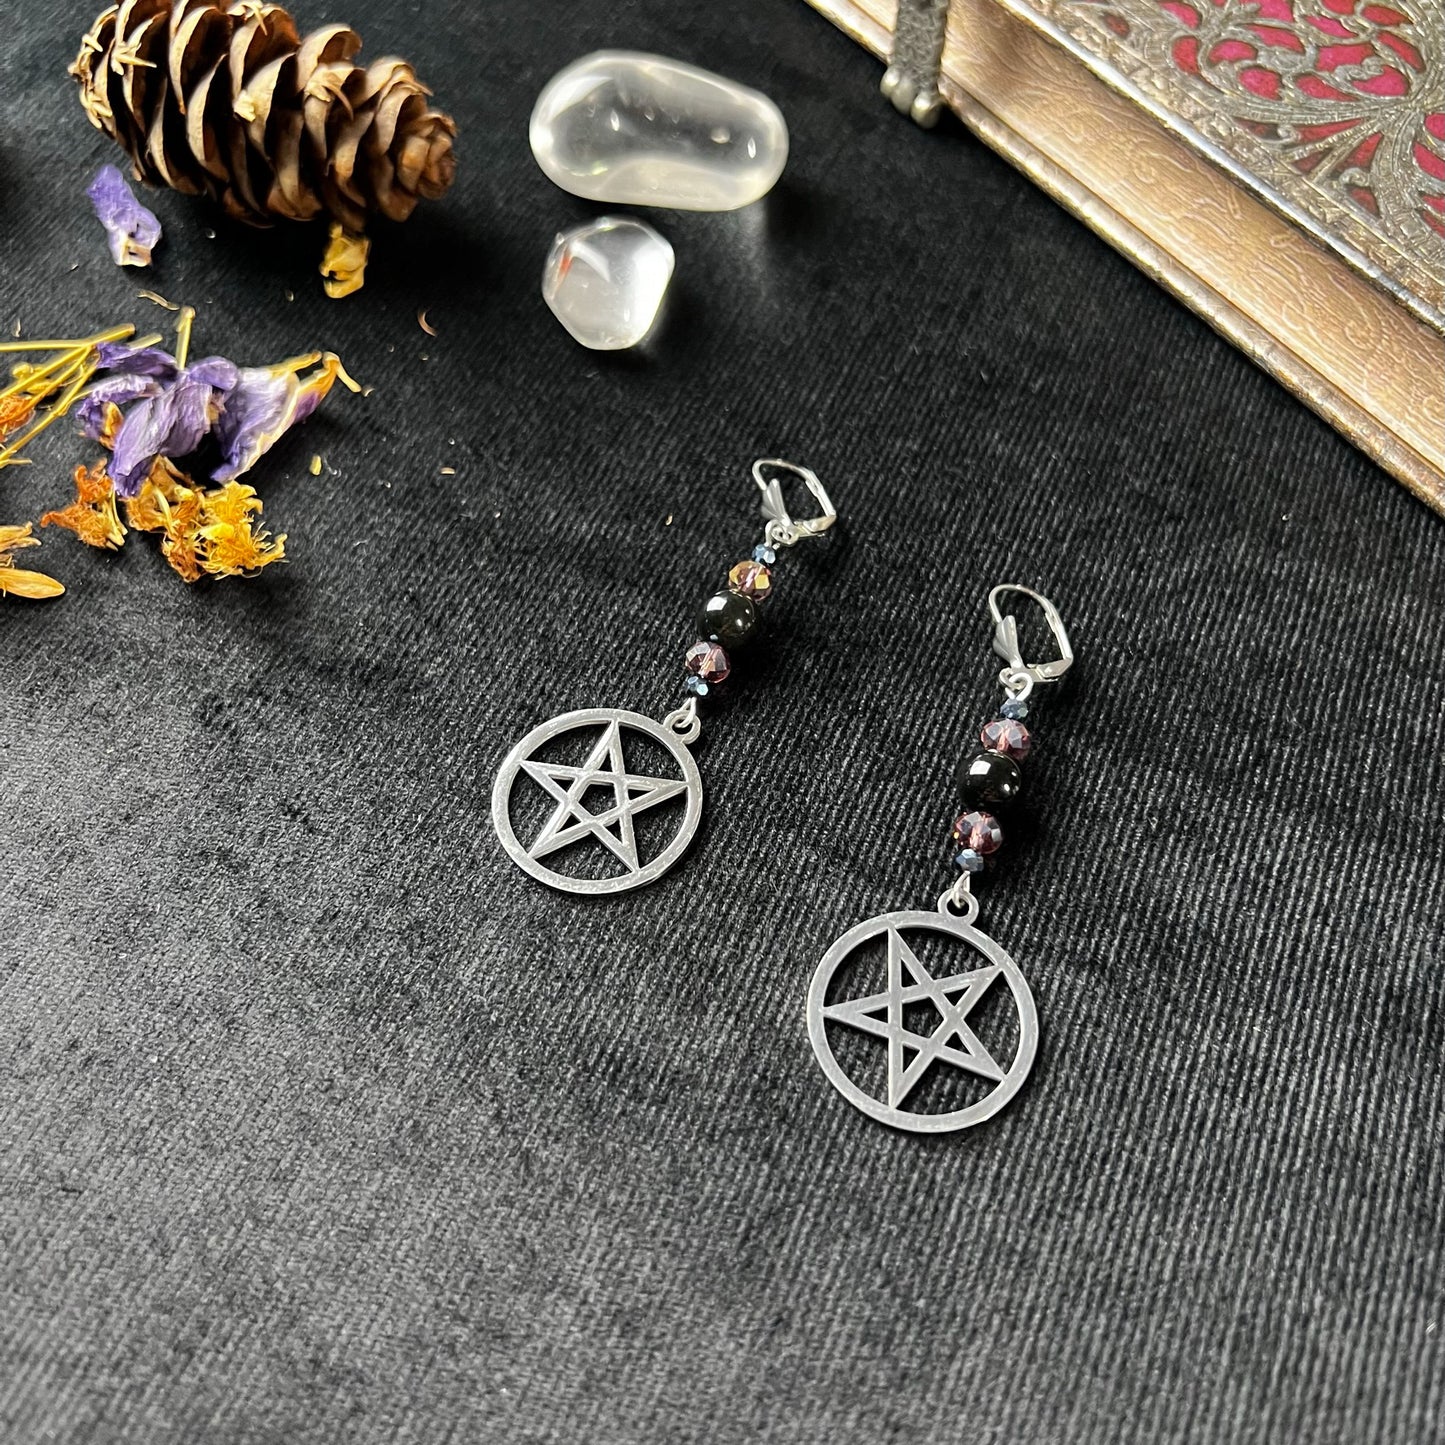 Inverted pentacle earrings made with stainless steel, obsidian and austrian crystal Baguette Magick